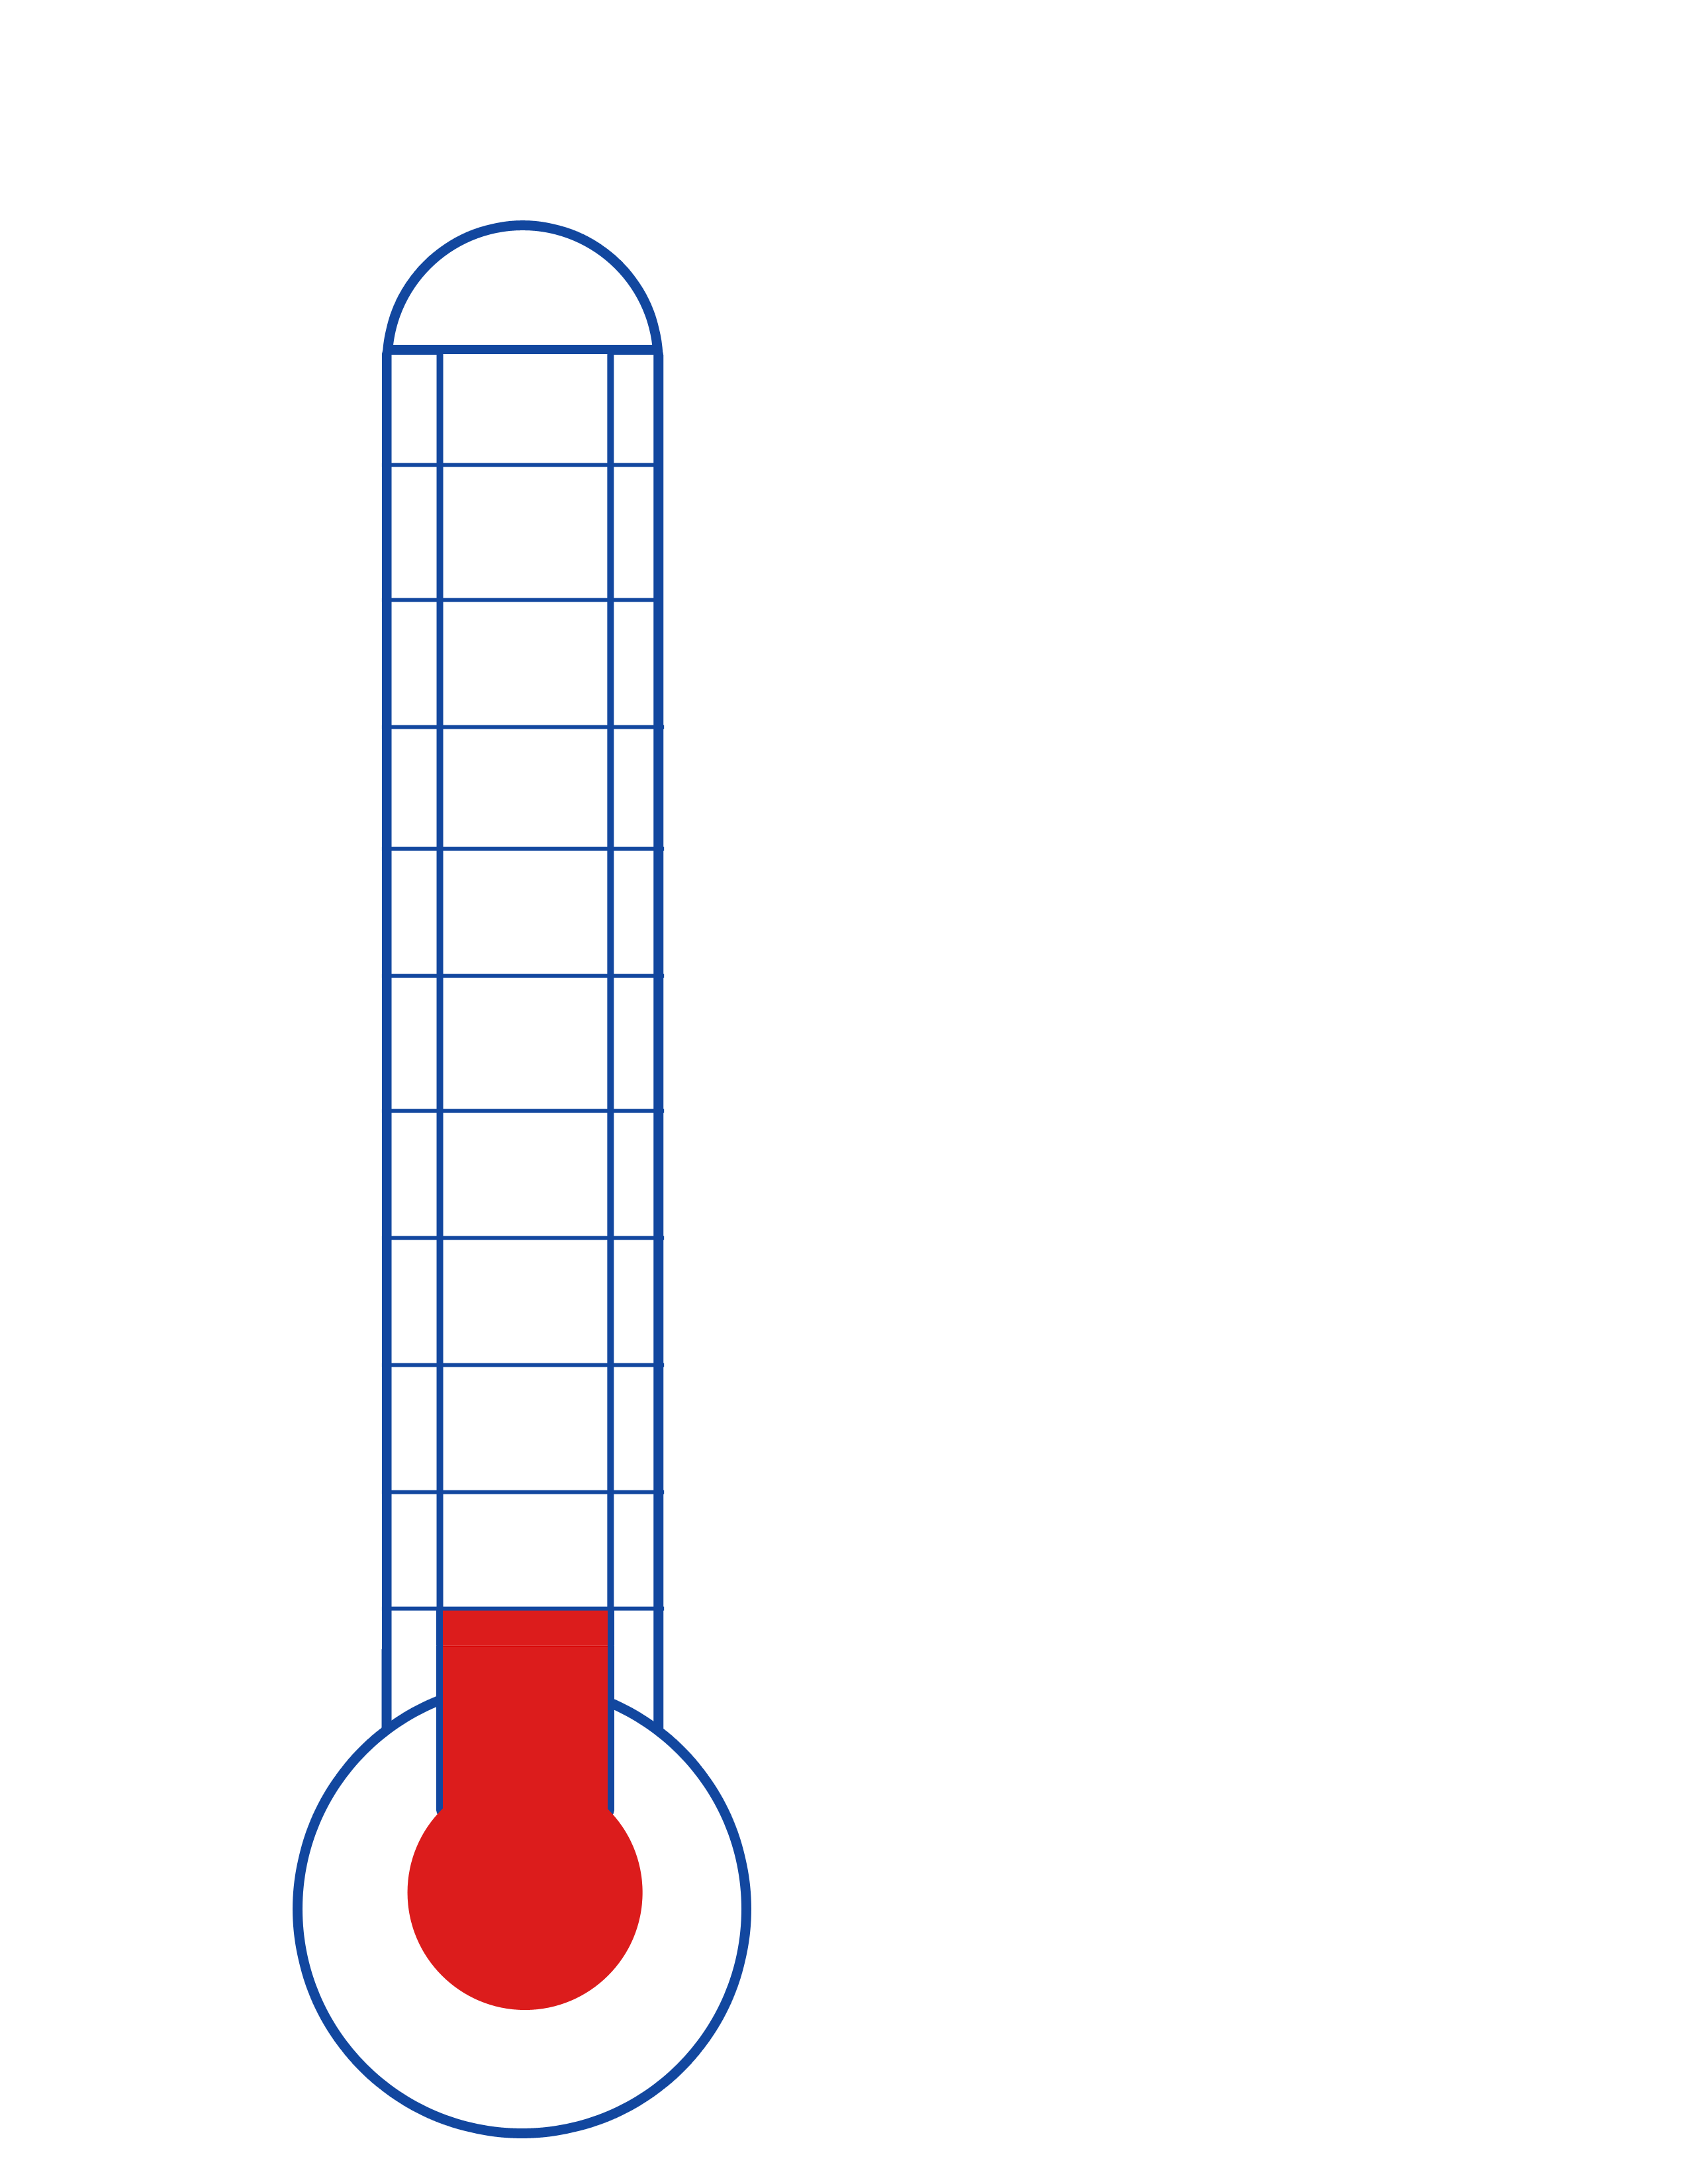 Fundraising Goal Thermometer Clip Art Source Http Thermometertemplate